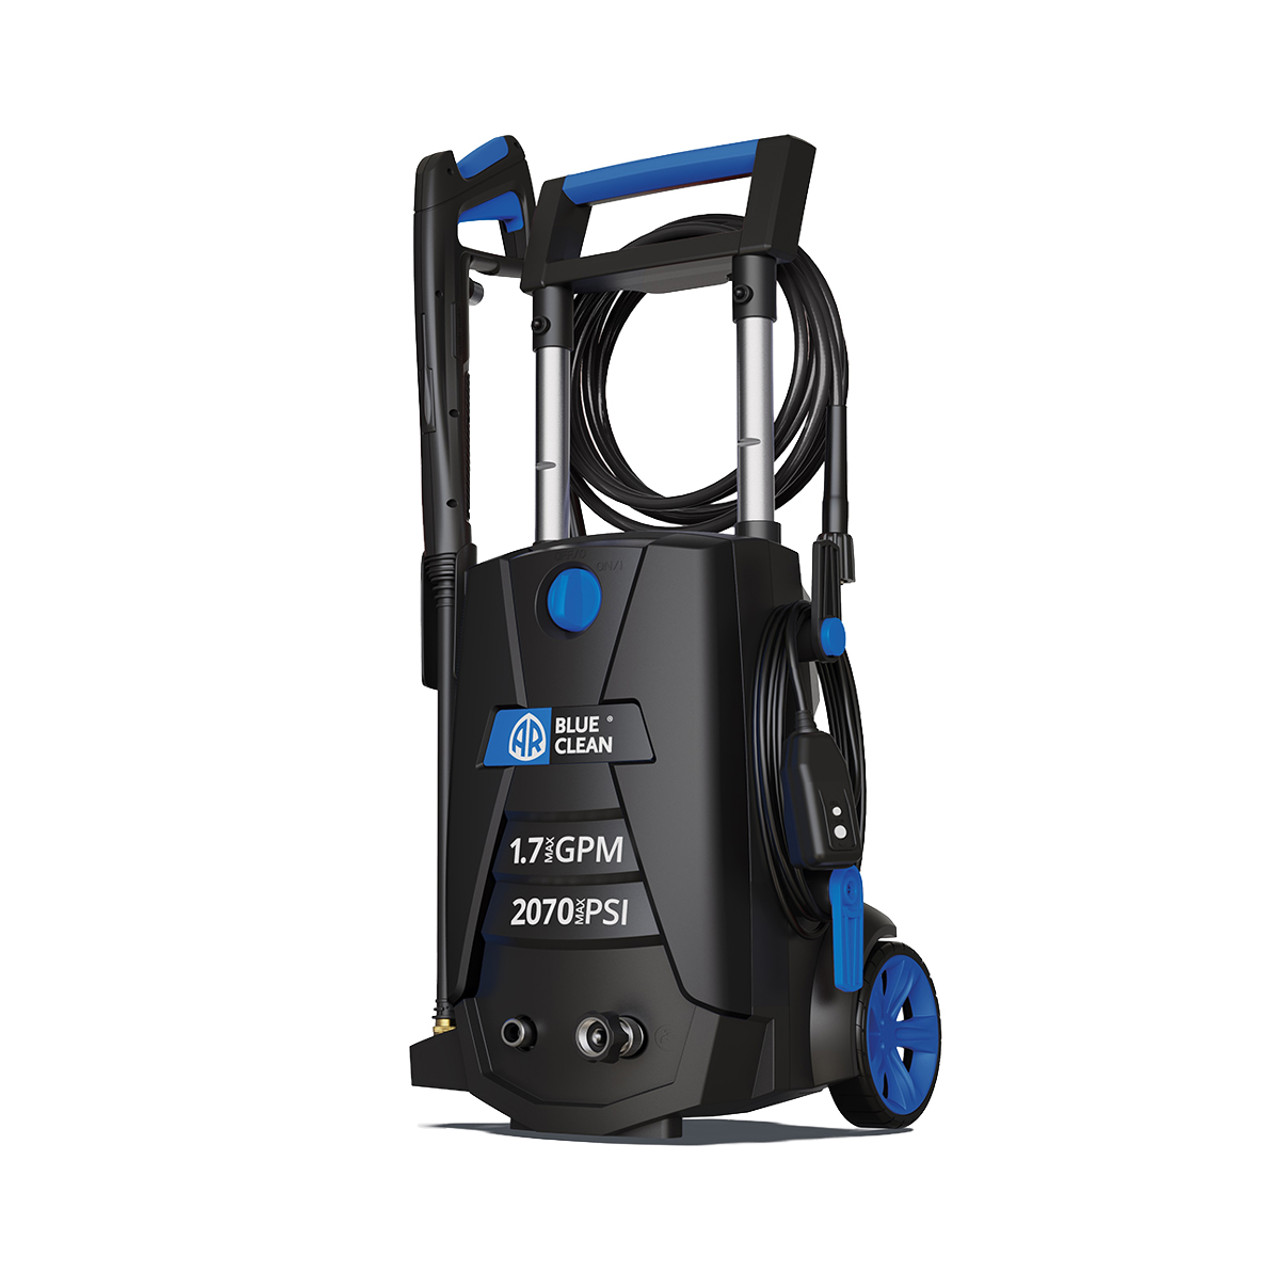 Small Portable 110V Electric High Pressure Washer - Buy Small Portable 110V  Electric High Pressure Washer Product on